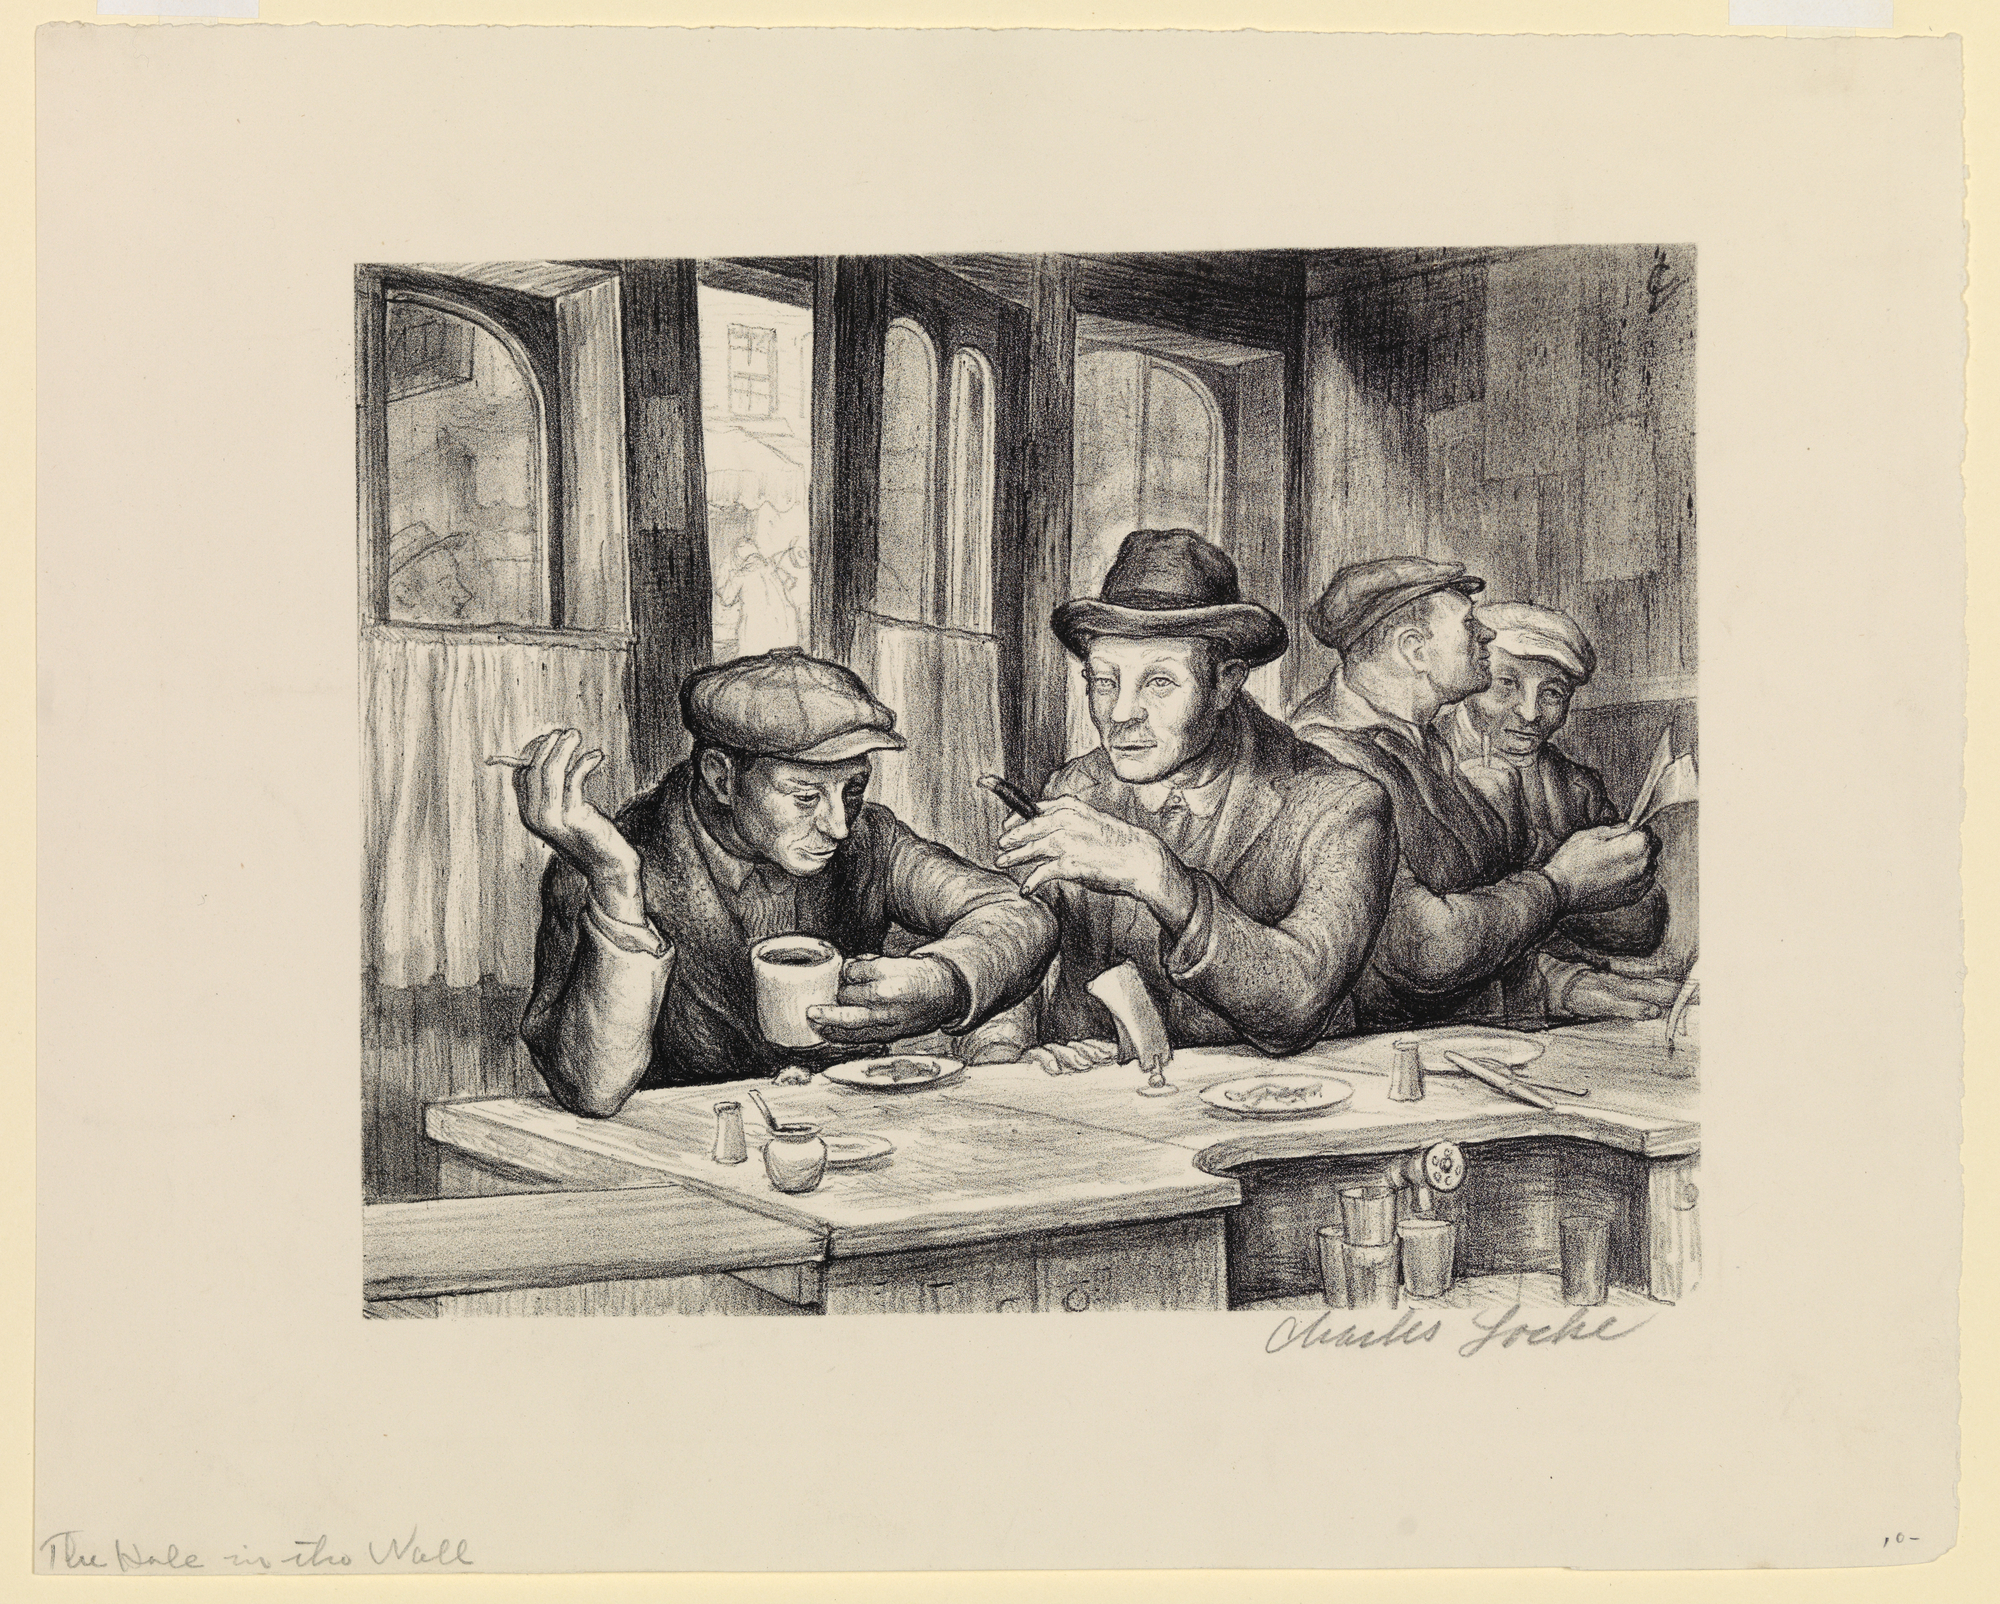 An indoor scene of four men sitting at the counter of a greasy-spoon diner, drinking coffee and smoking. The two men in the foreground are deep in conversation, while the other pair is looking over their food bill. Behind the men the restaurant door is slightly open, revealing people on the street outside.